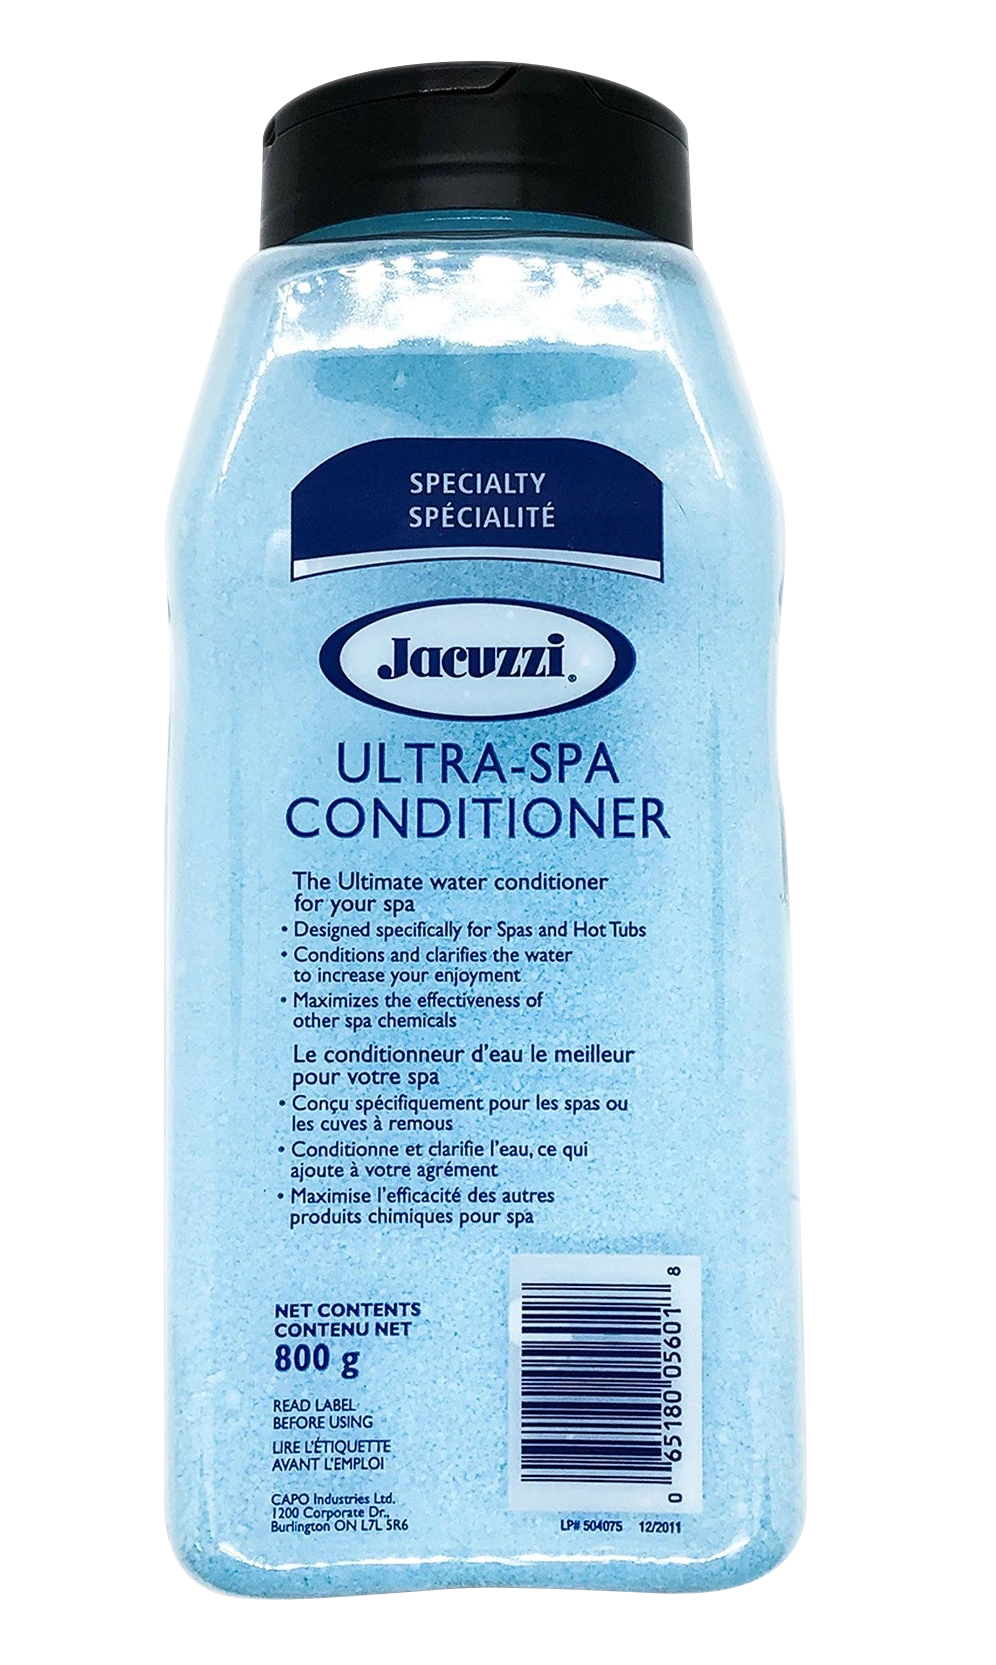 Jacuzzi Ultra Spa - water conditioner that helps make your water clear and blue.